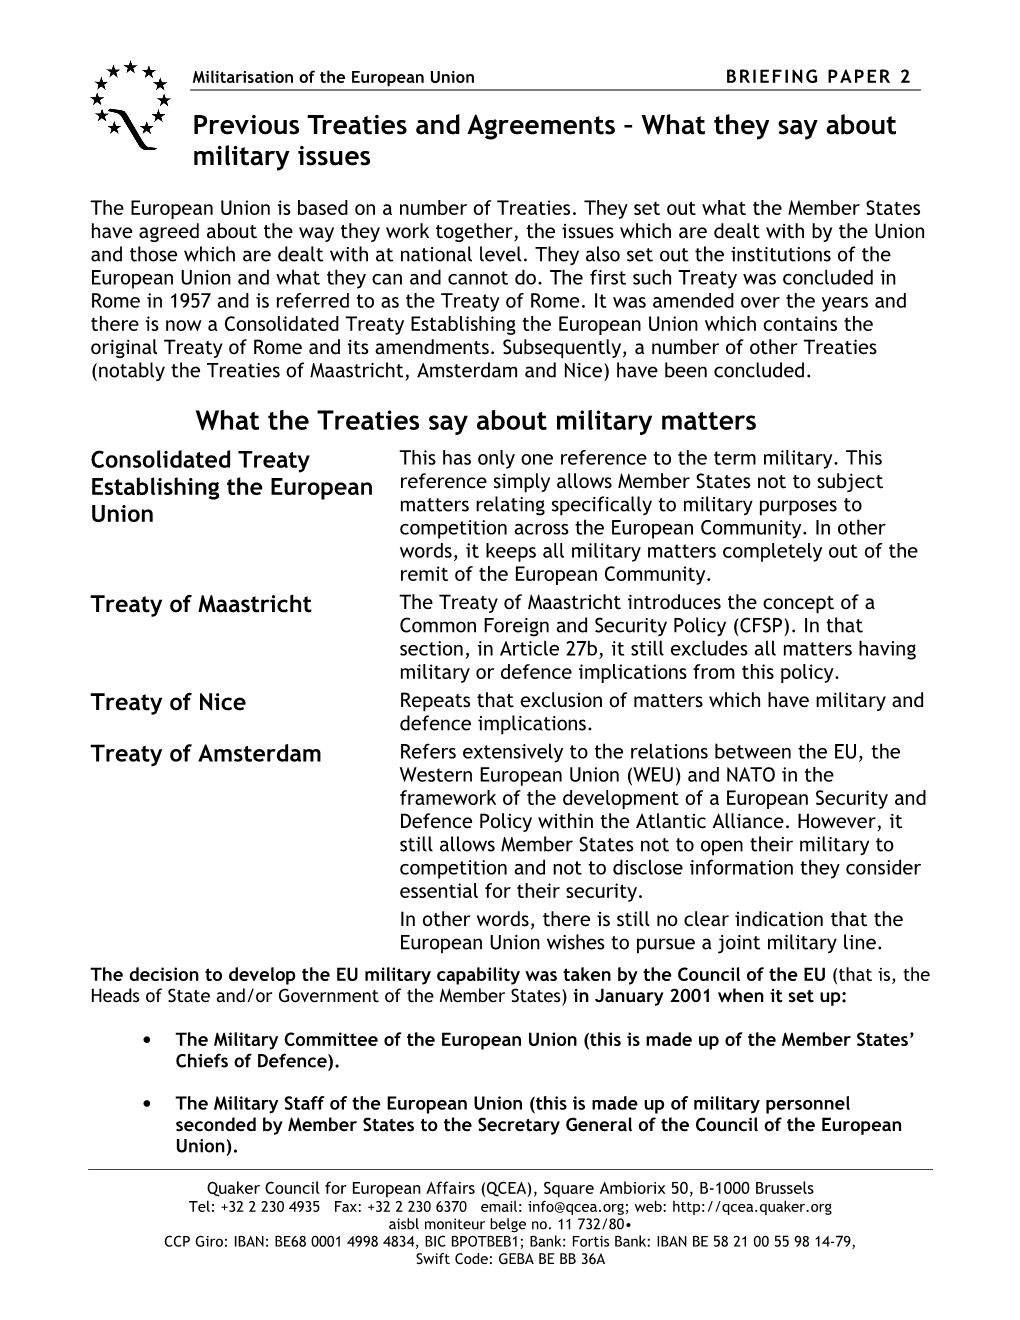 What the Treaties Say About Military Matters Consolidated Treaty This Has Only One Reference to the Term Military